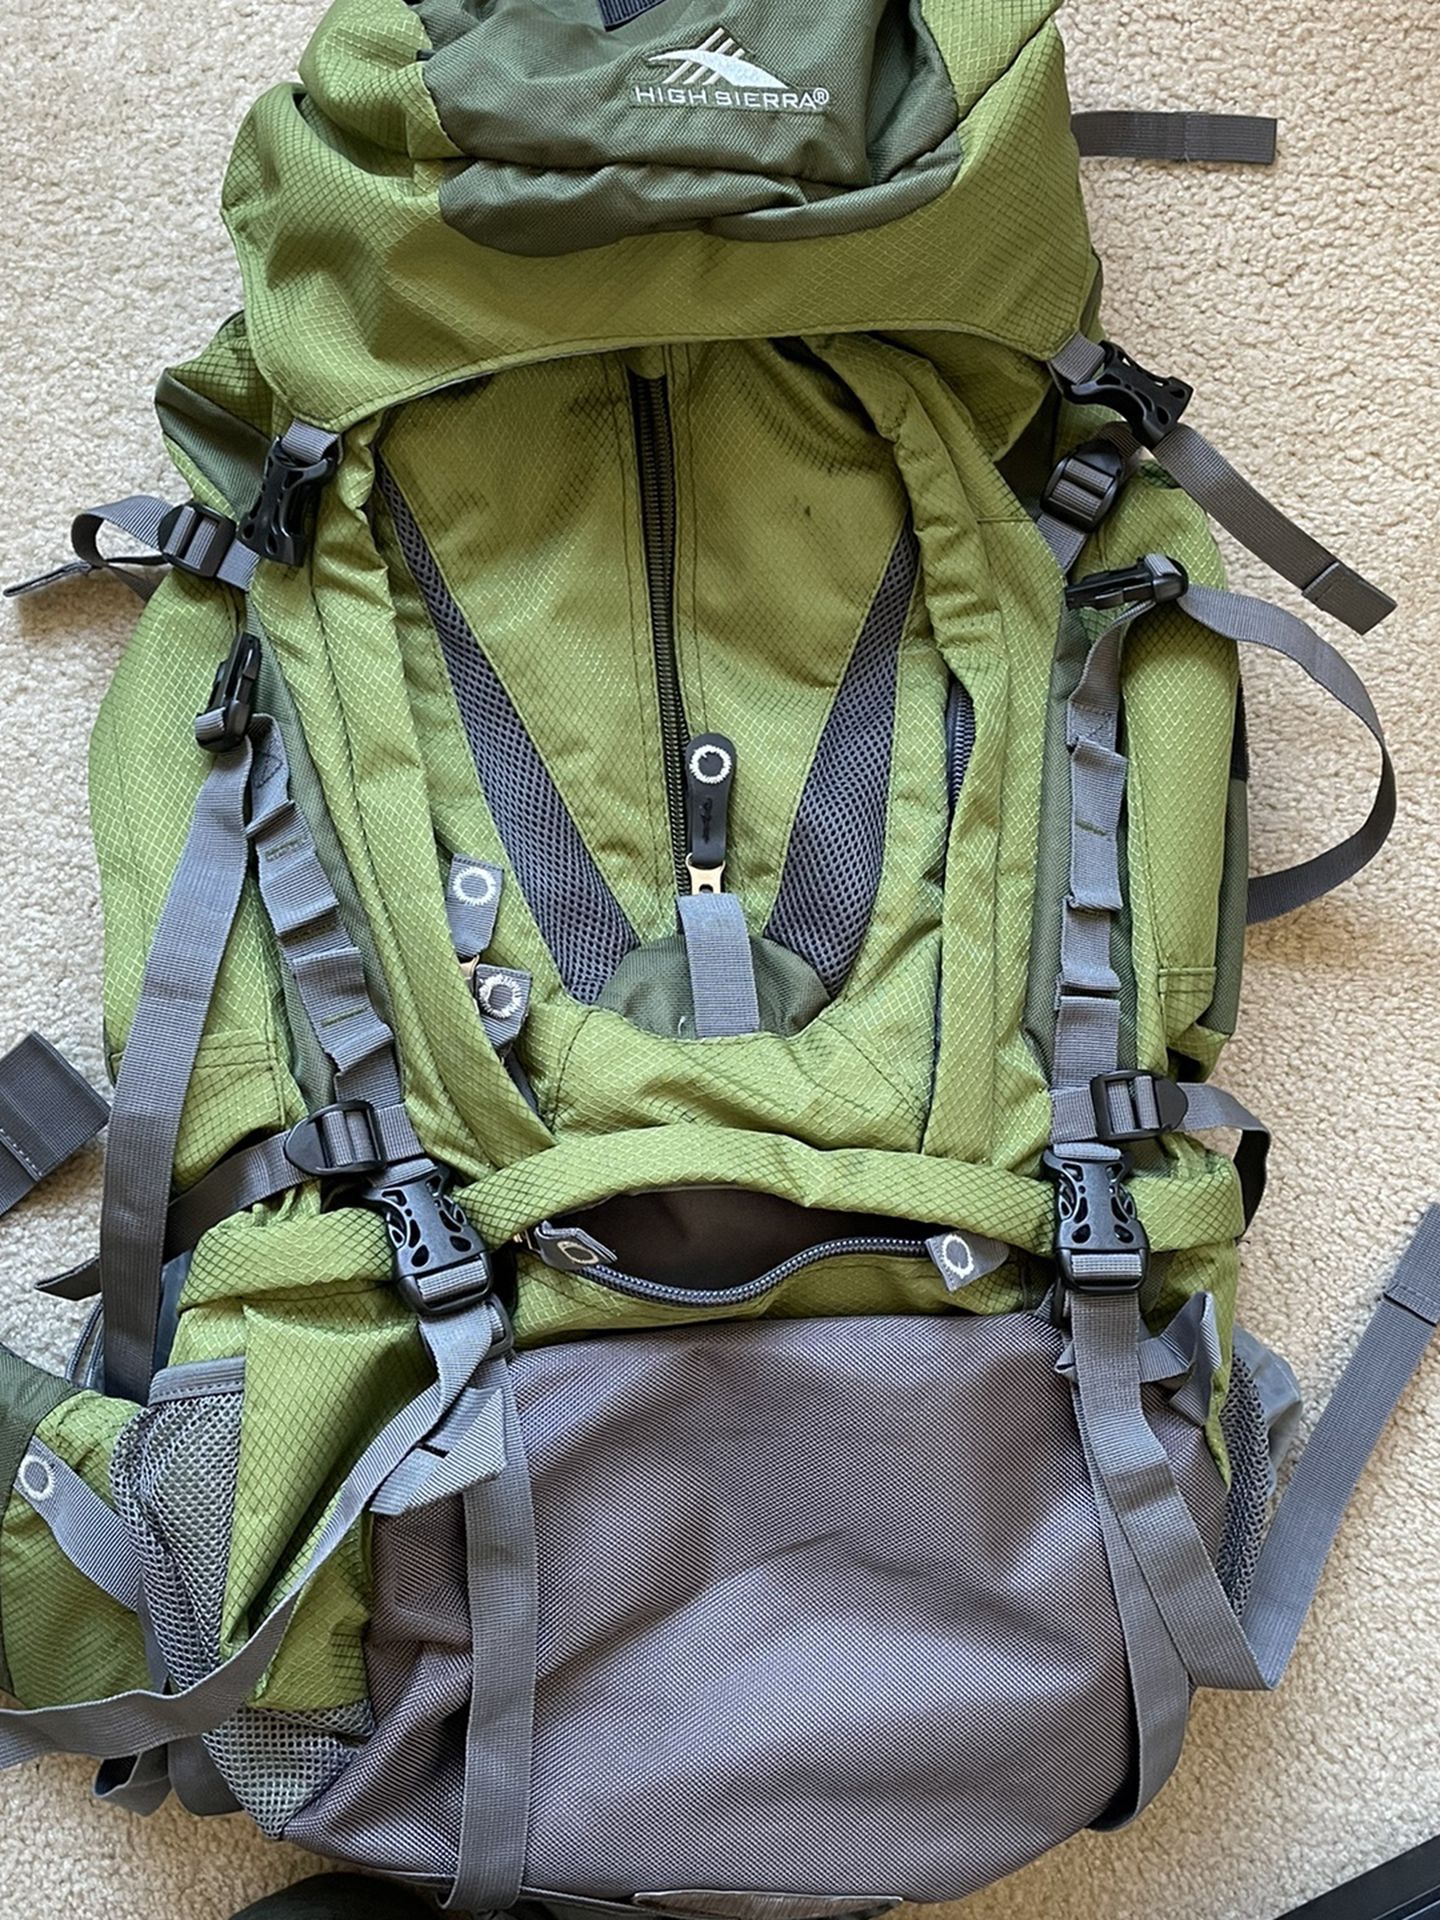 Hiking / Camping / Travel Backpack by High Sierra